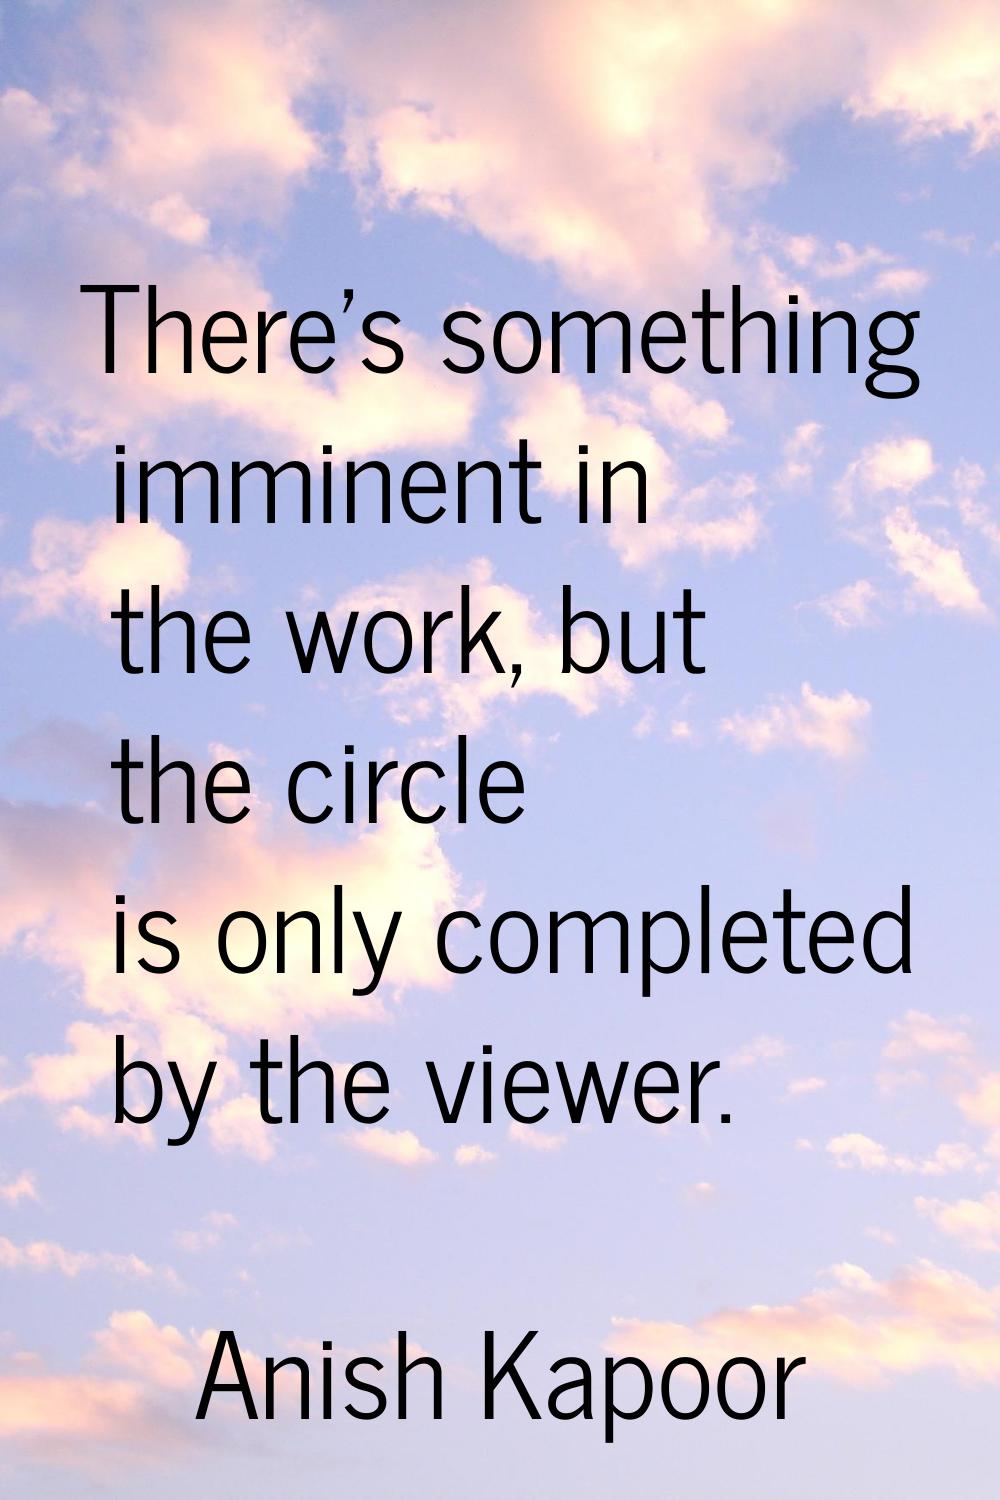 There's something imminent in the work, but the circle is only completed by the viewer.